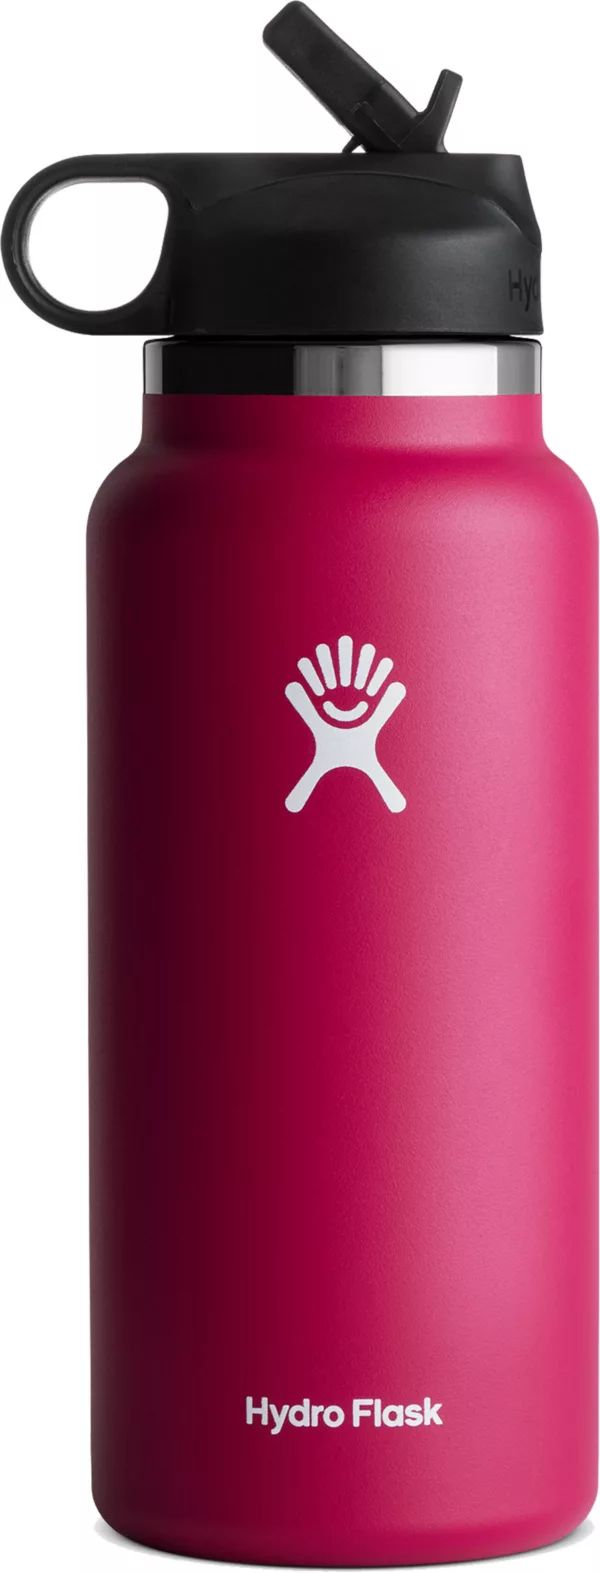 Hydro Flask Wide Mouth 32 oz. Bottle with Straw Lid | Dick's Sporting Goods